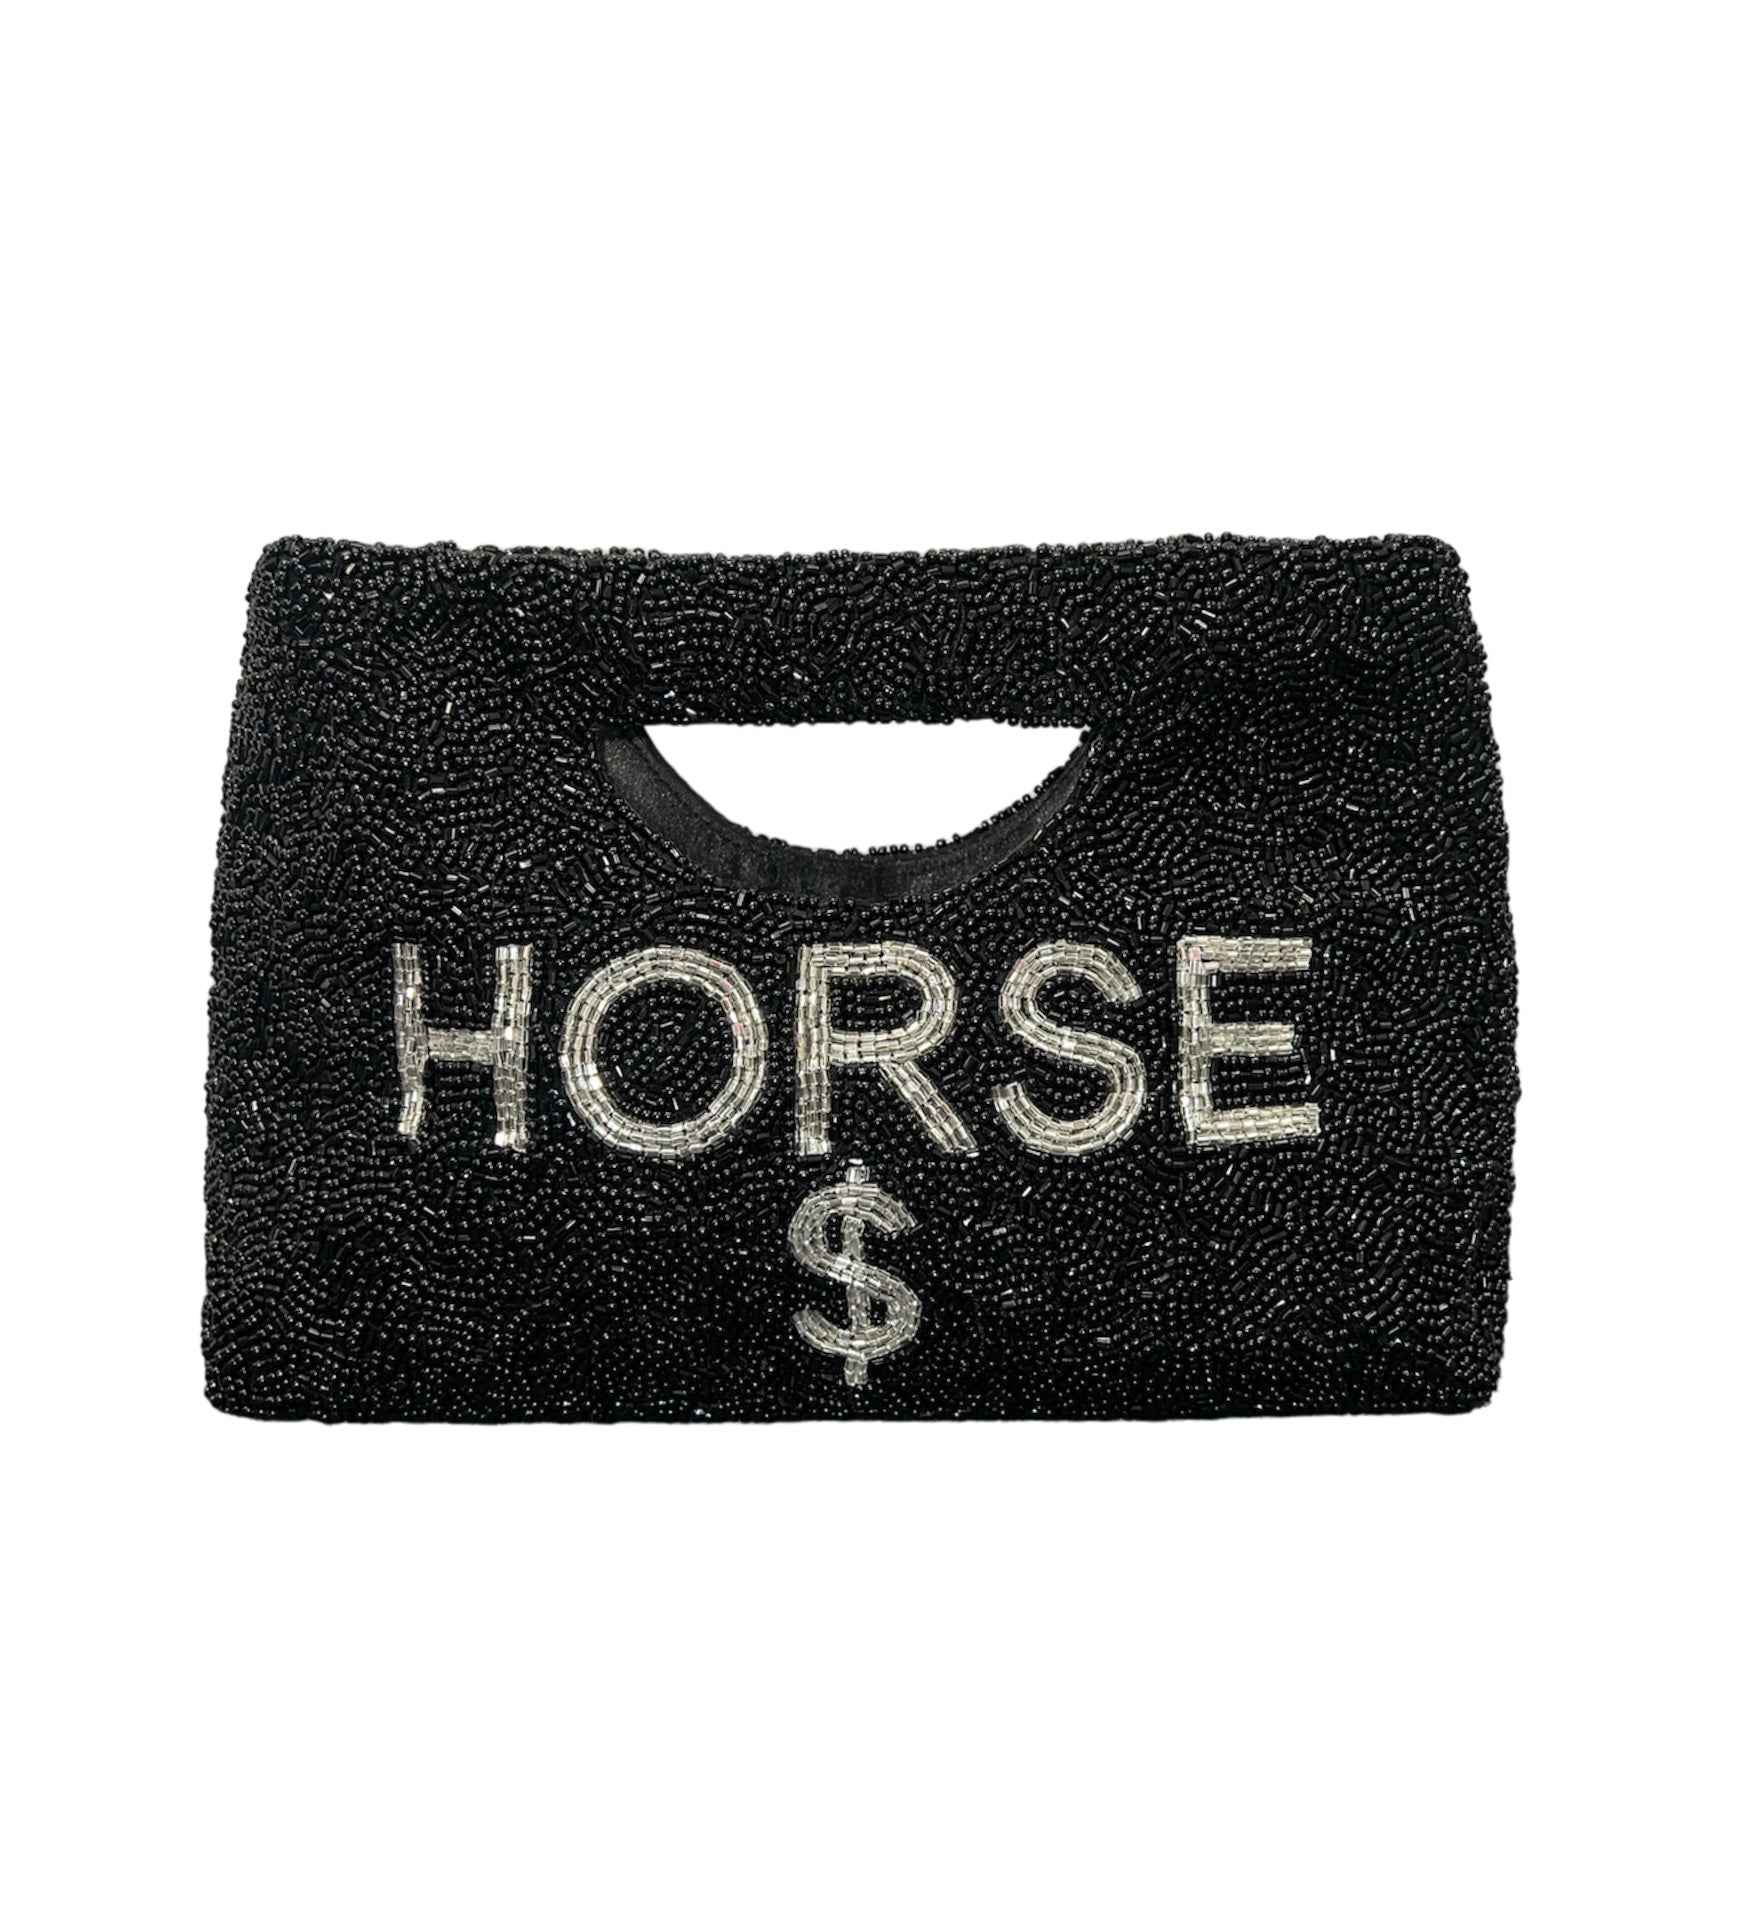 Beaded Horse $ Cut Out Clutch